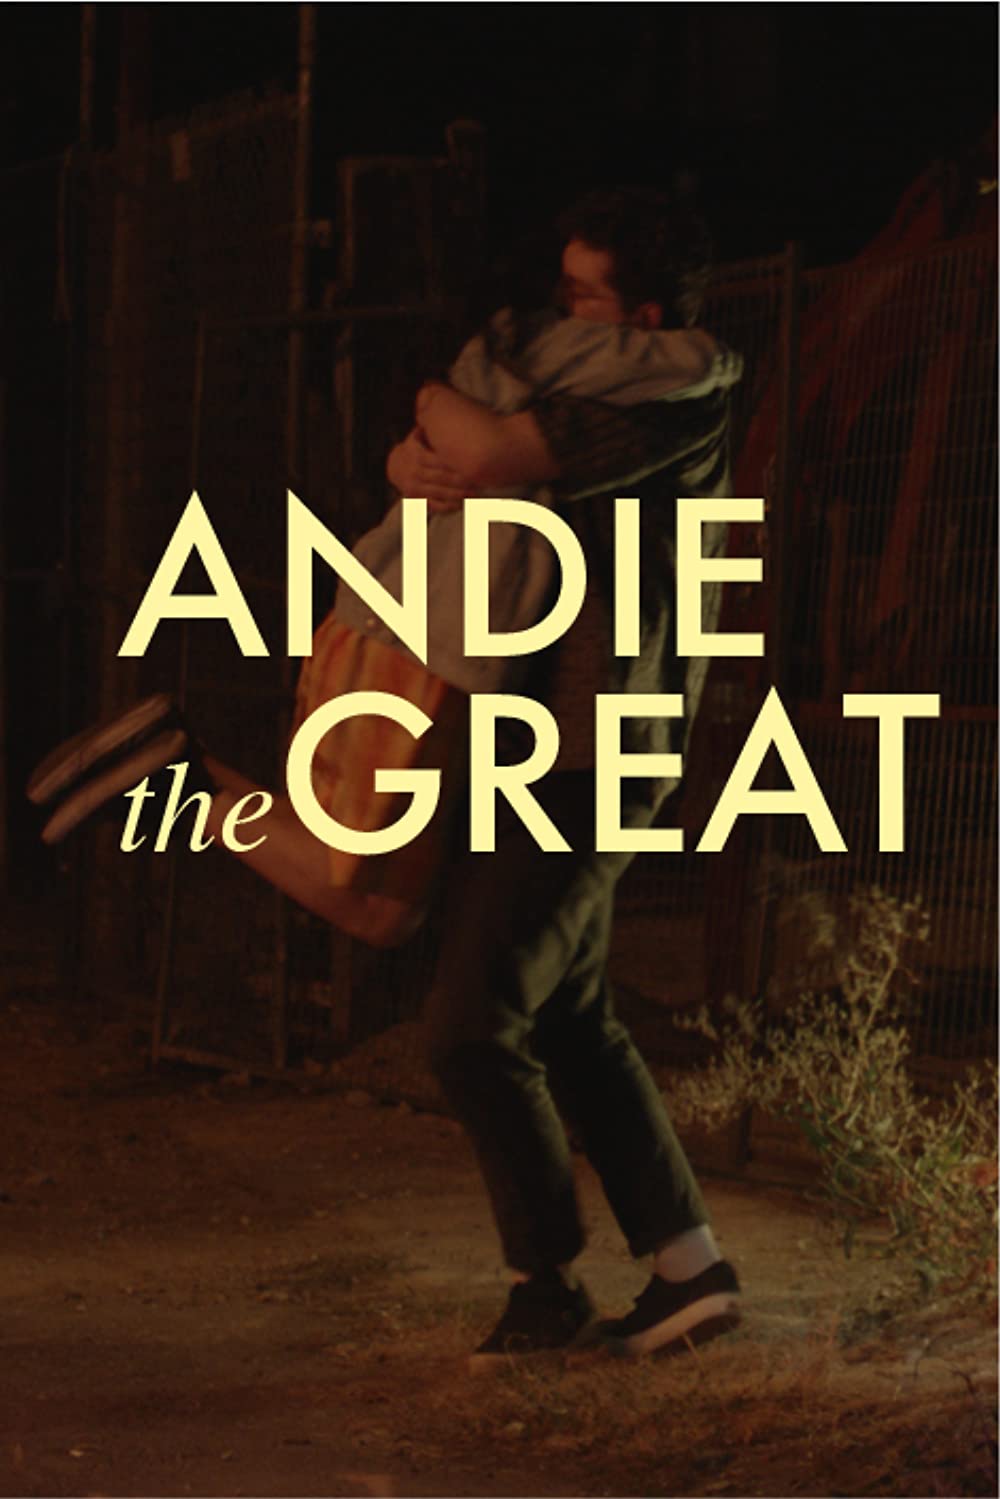 Andie The Great 2021 English 233MB HDRip Download